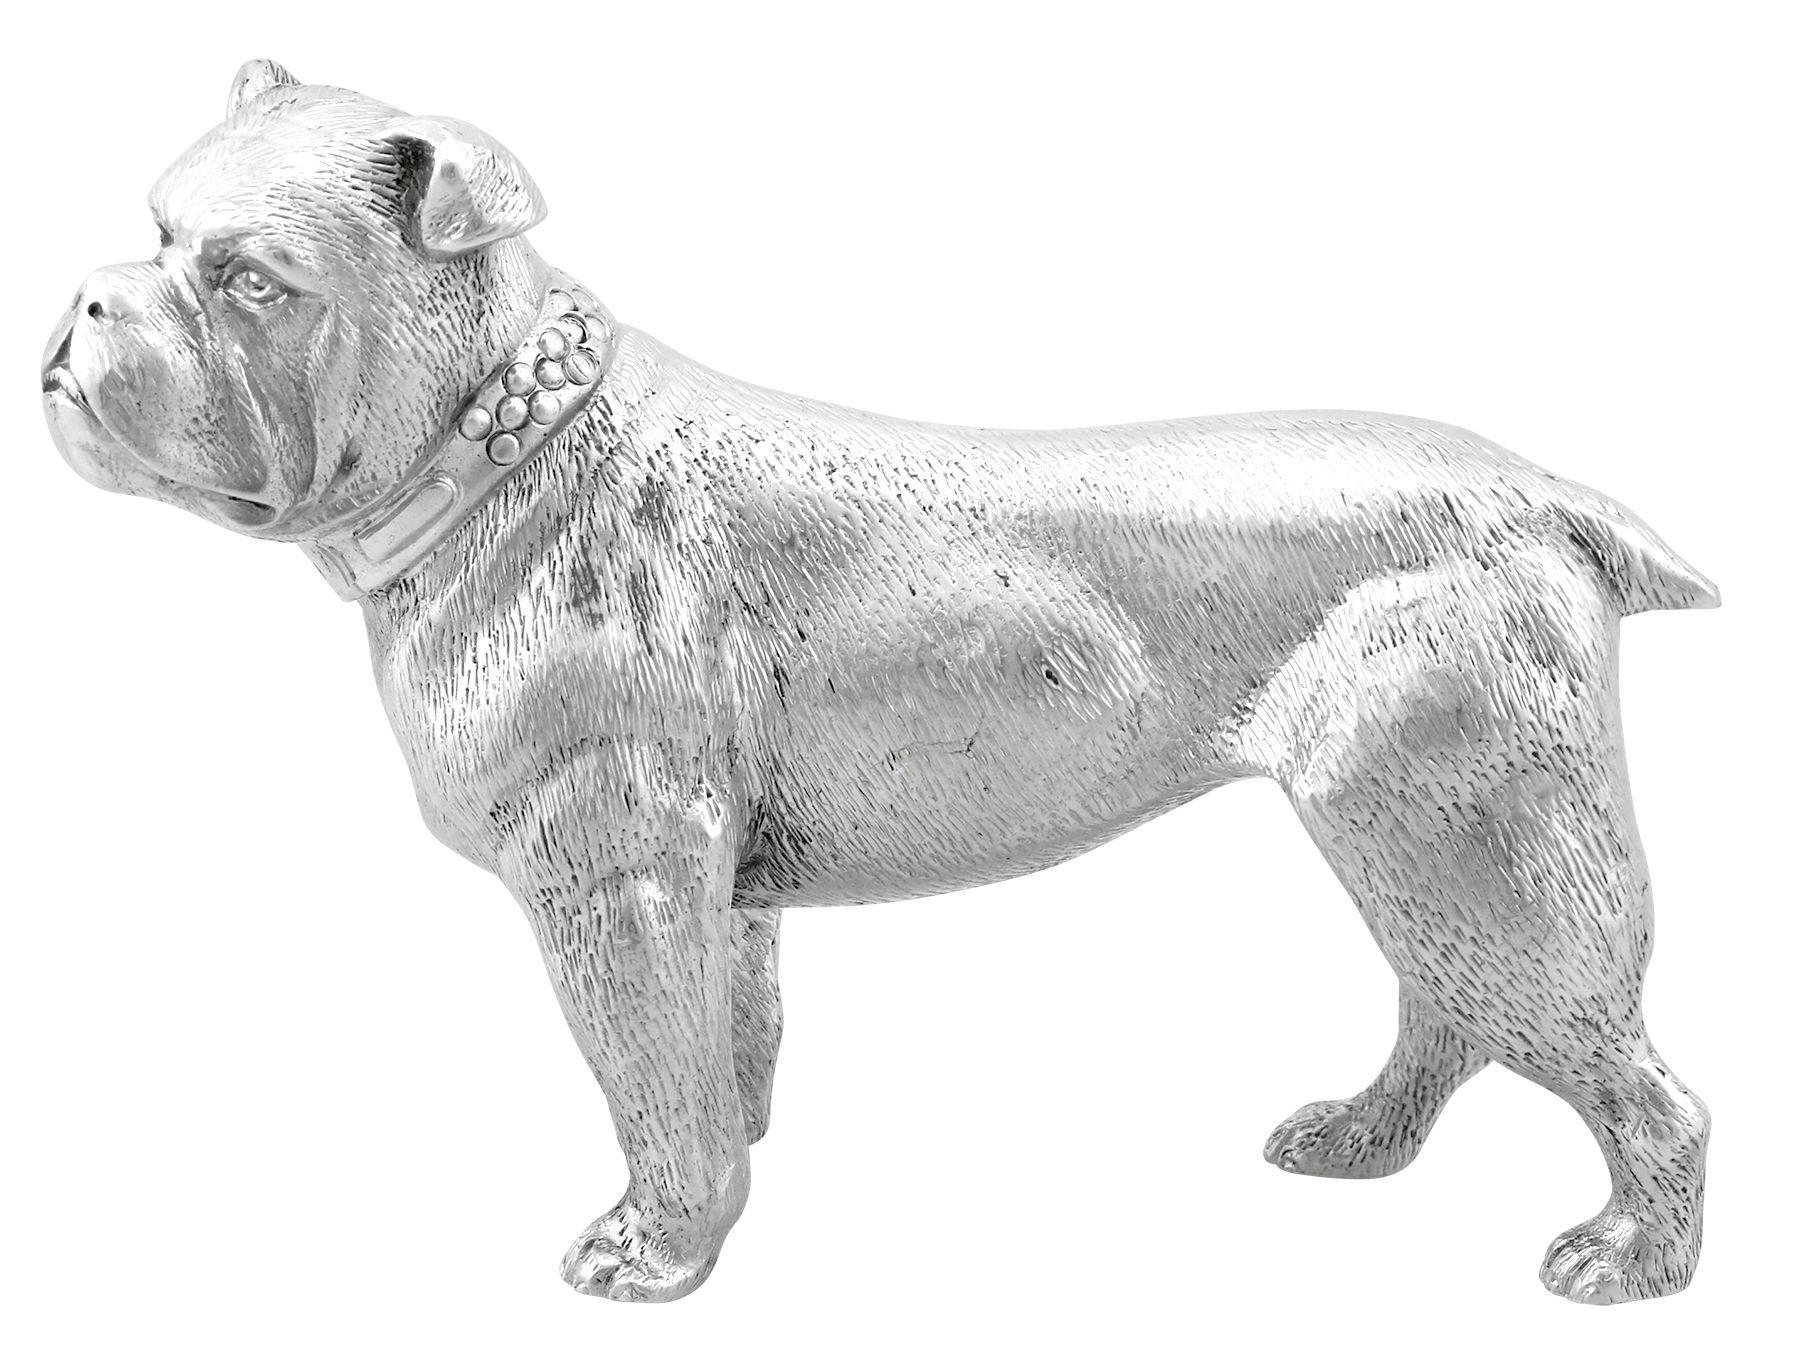 An exceptional, fine and impressive vintage 1980s cast European sterling silver figurine of a bulldog; part of our animal related silverware collection

This exceptional vintage cast sterling silver ornament has been realistically modelled in the